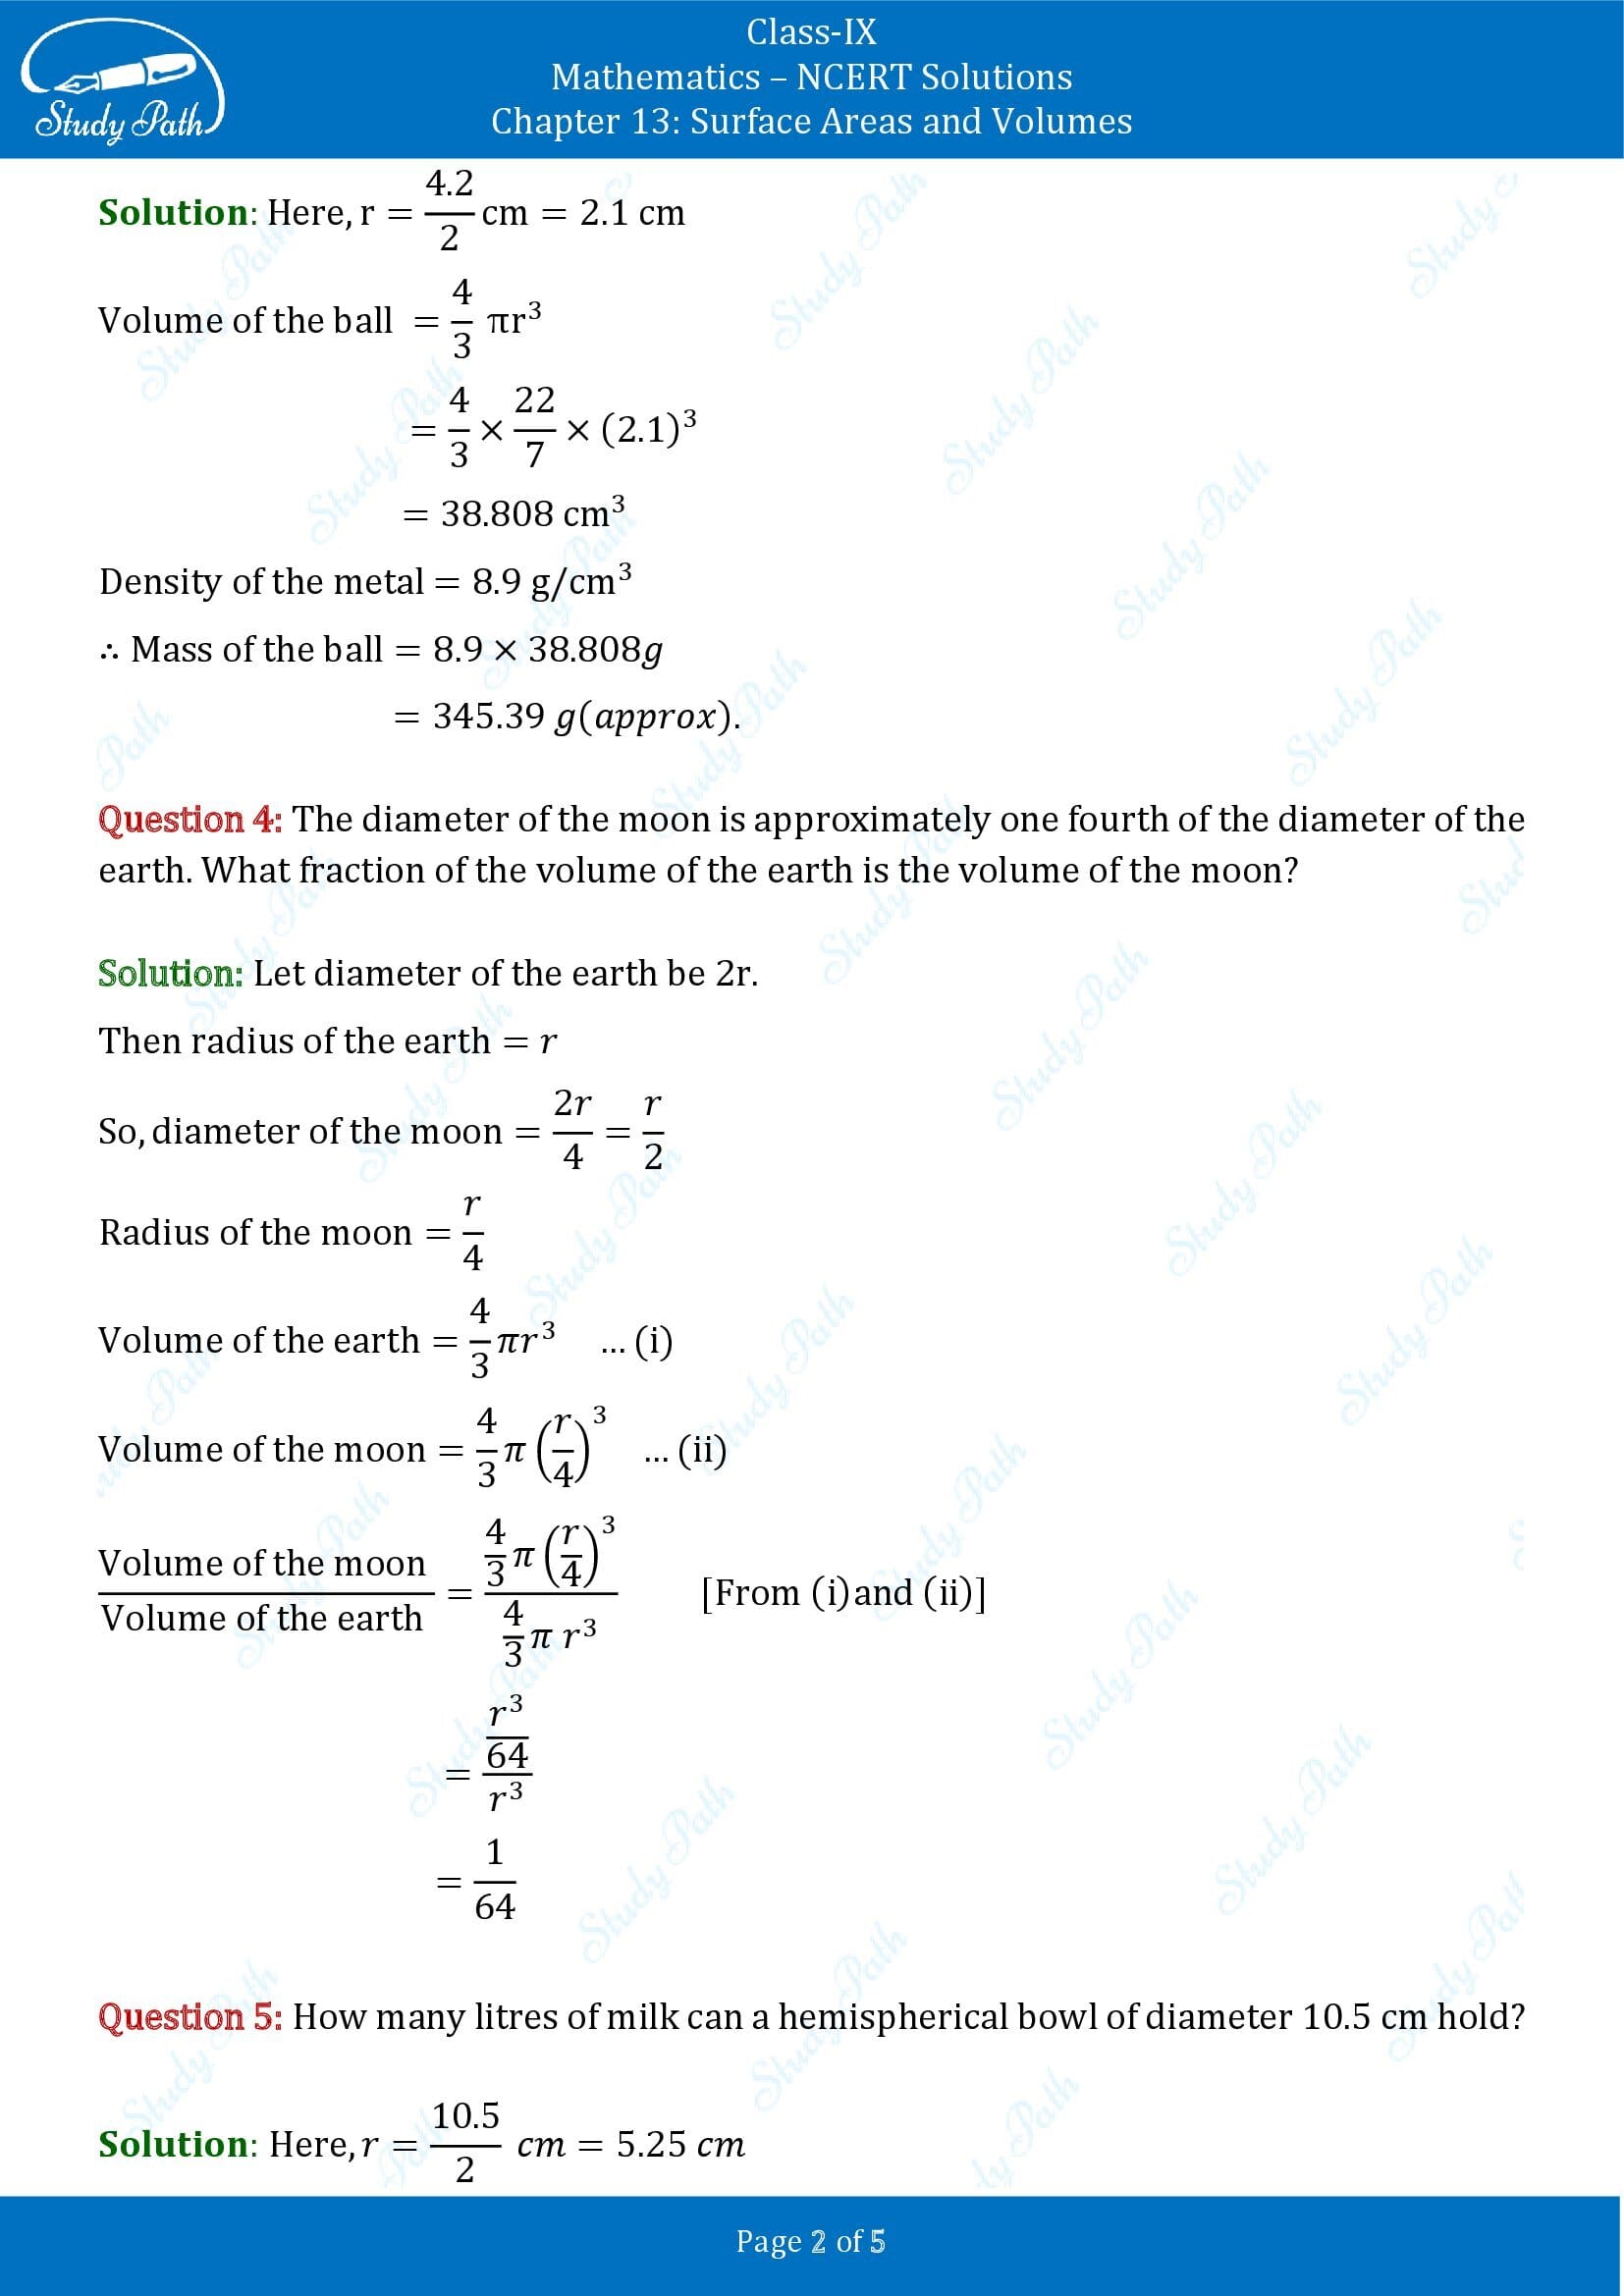 NCERT Solutions for Class 9 Maths Chapter 13 Surface Areas and Volumes Exercise 13.8 00002